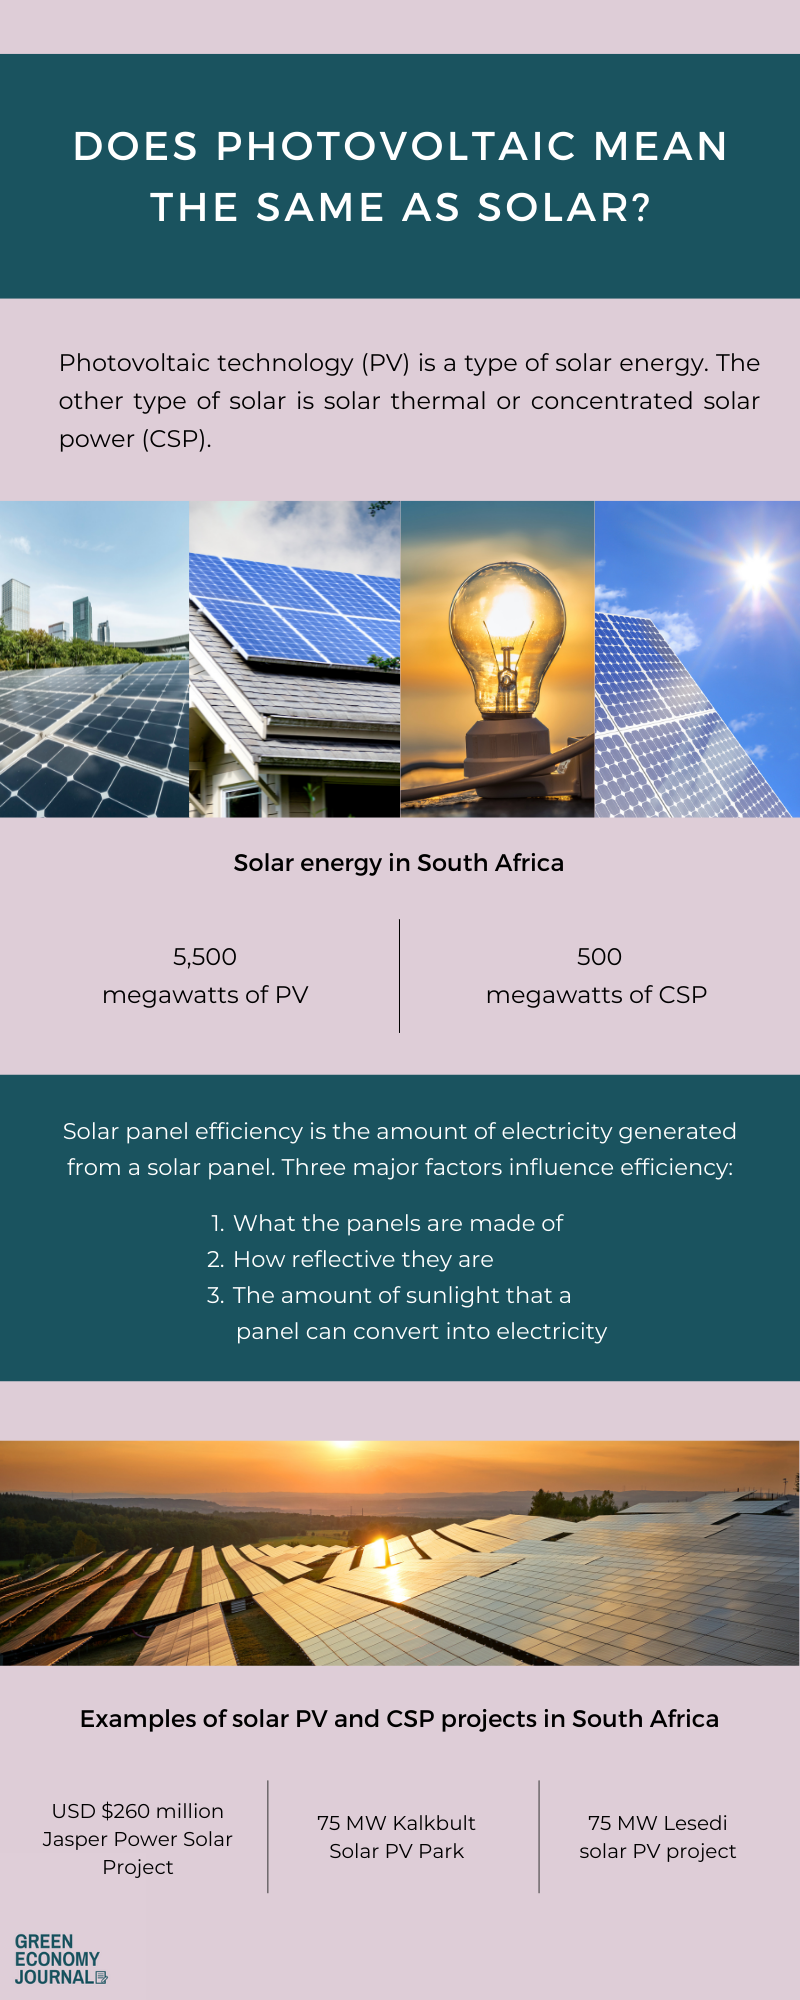 Does photovoltaic mean the same as solar